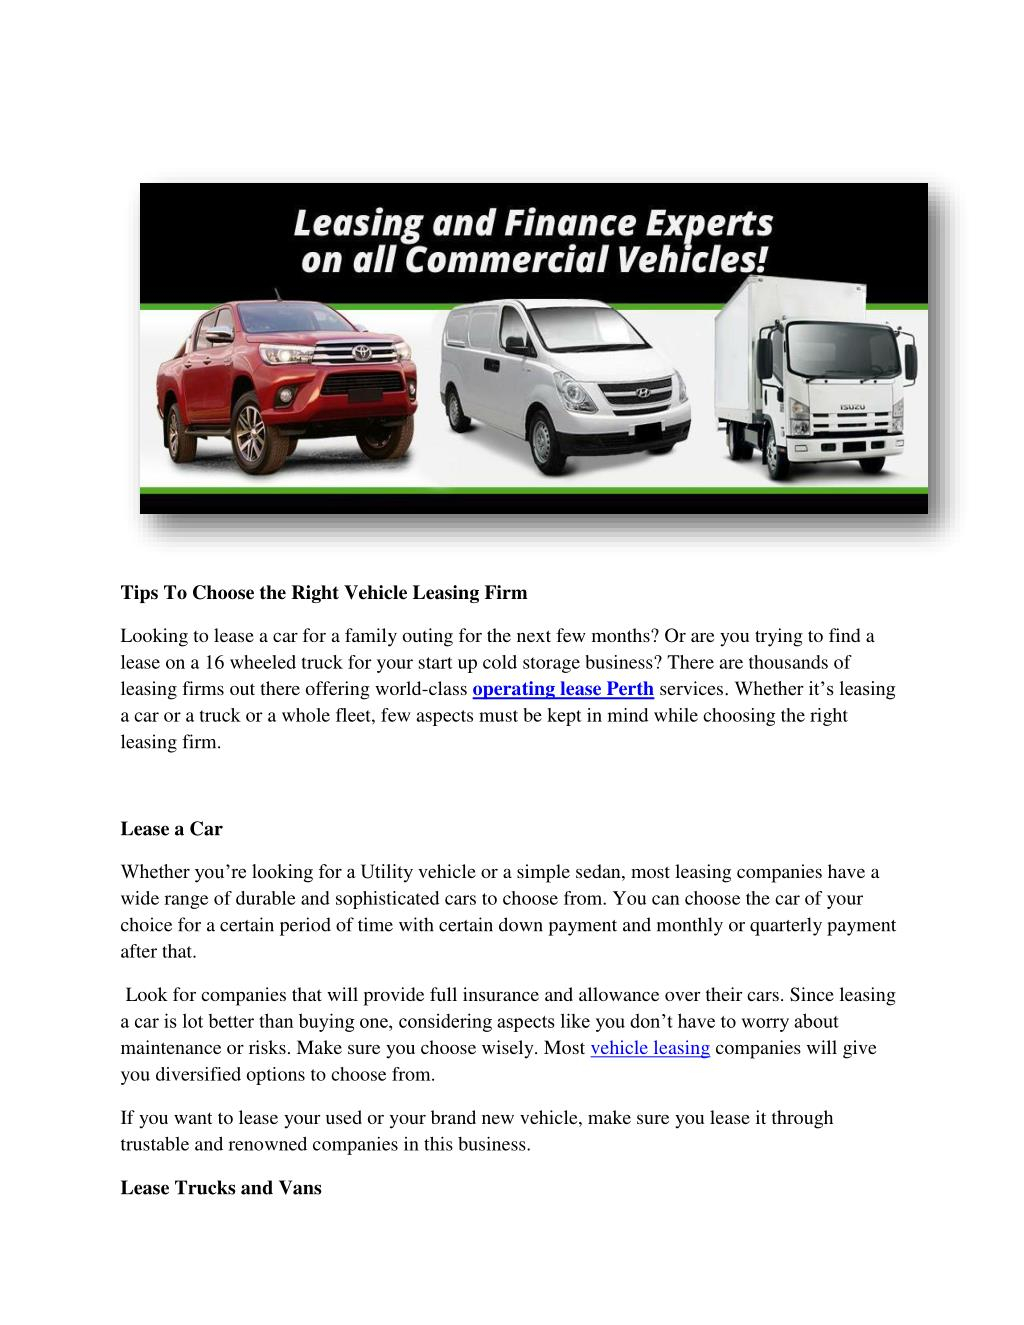 Ppt Perfect Vehicle Leasing Experinced Operating Lease throughout proportions 1024 X 1325